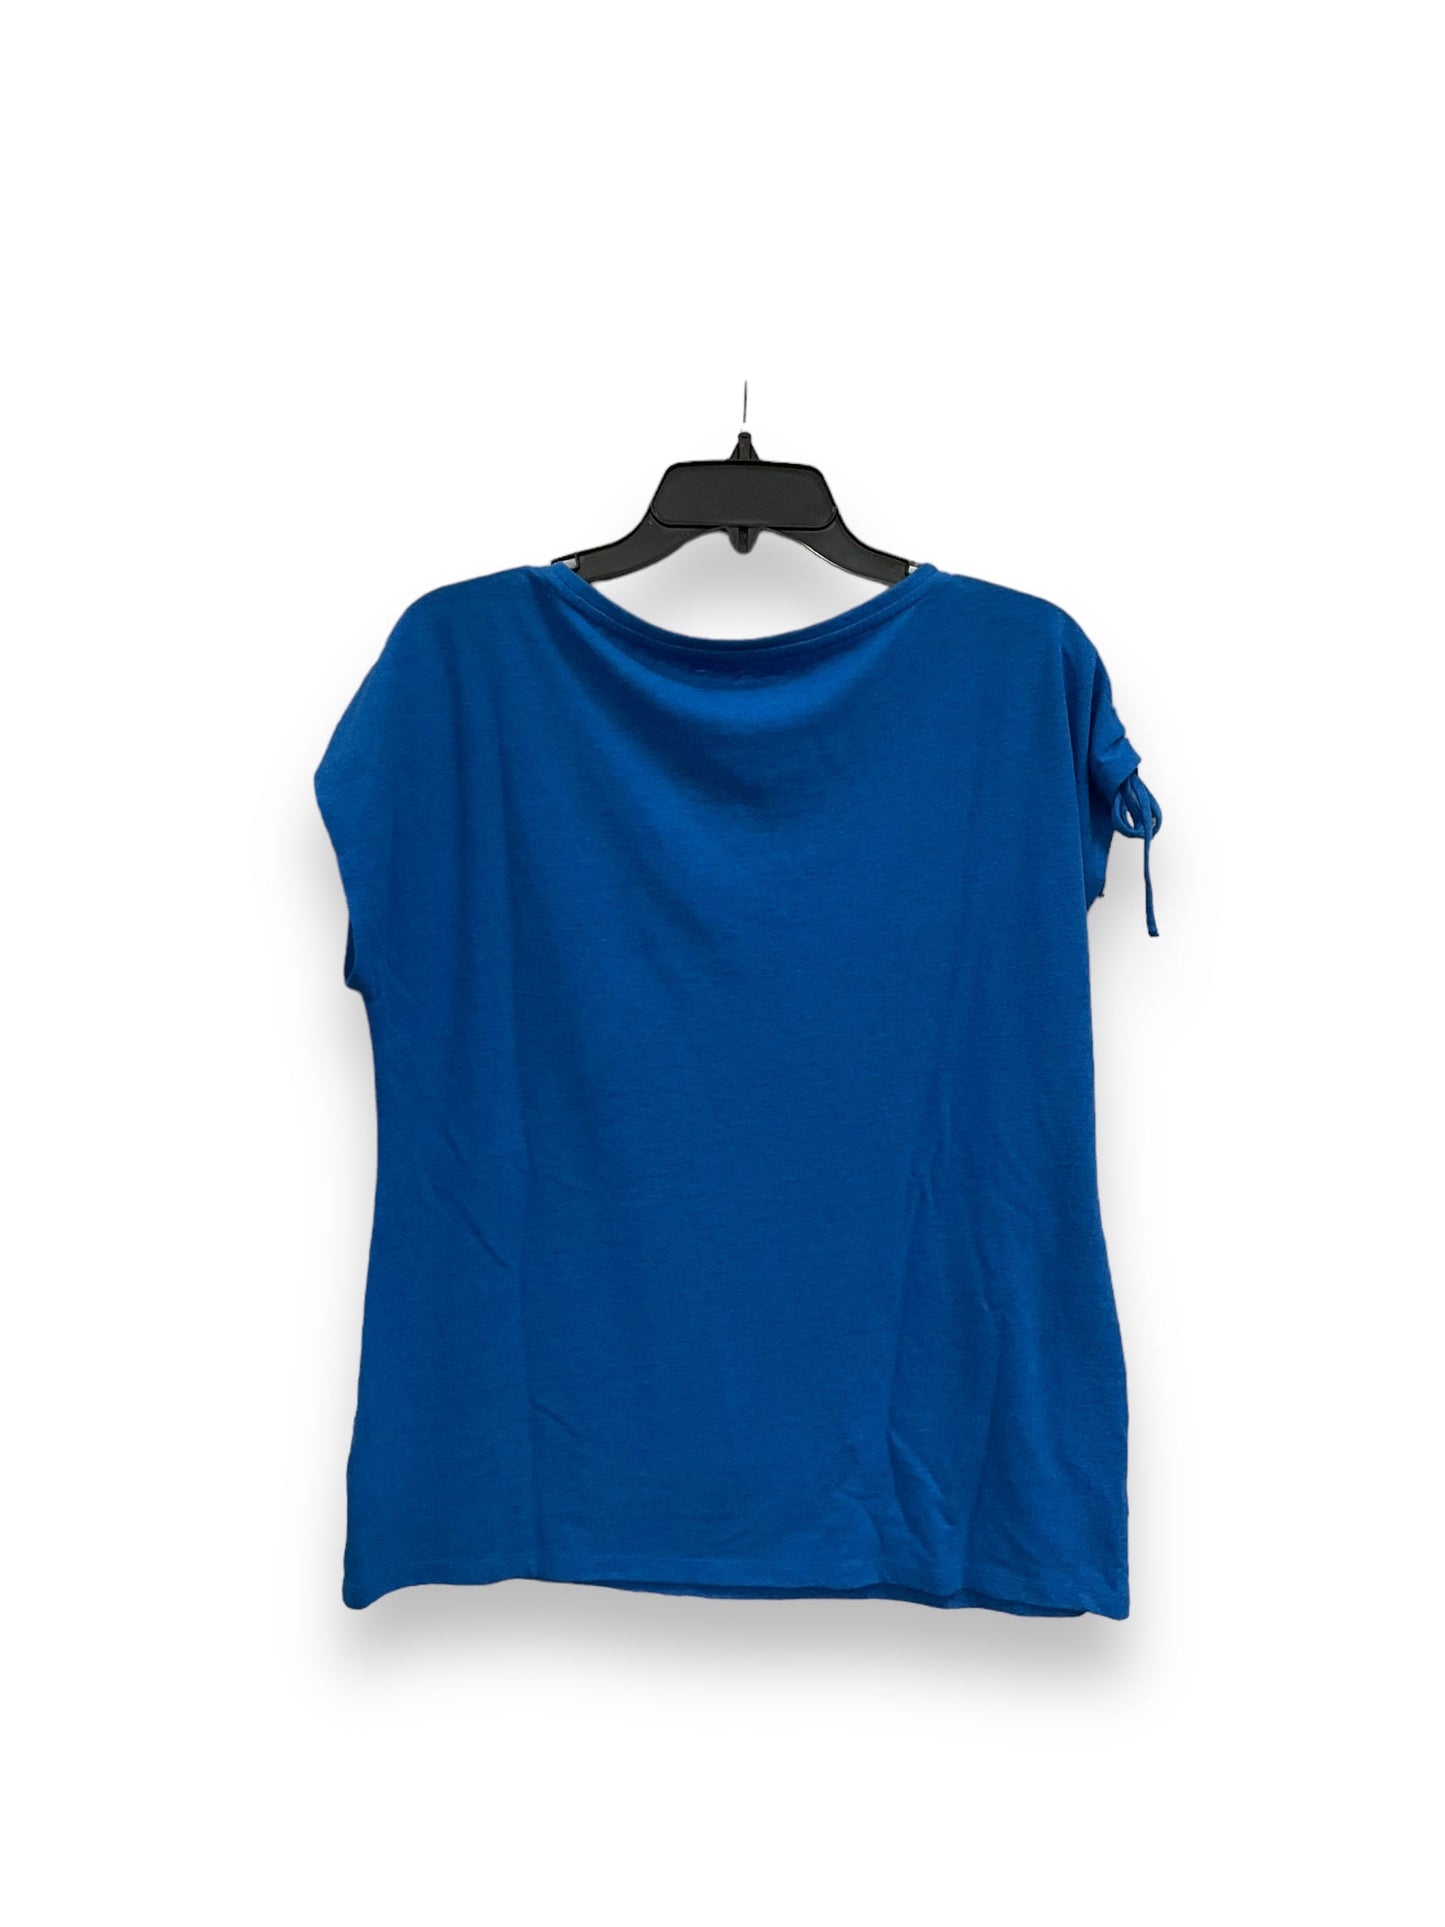 Top Sleeveless Basic By Talbots  Size: L